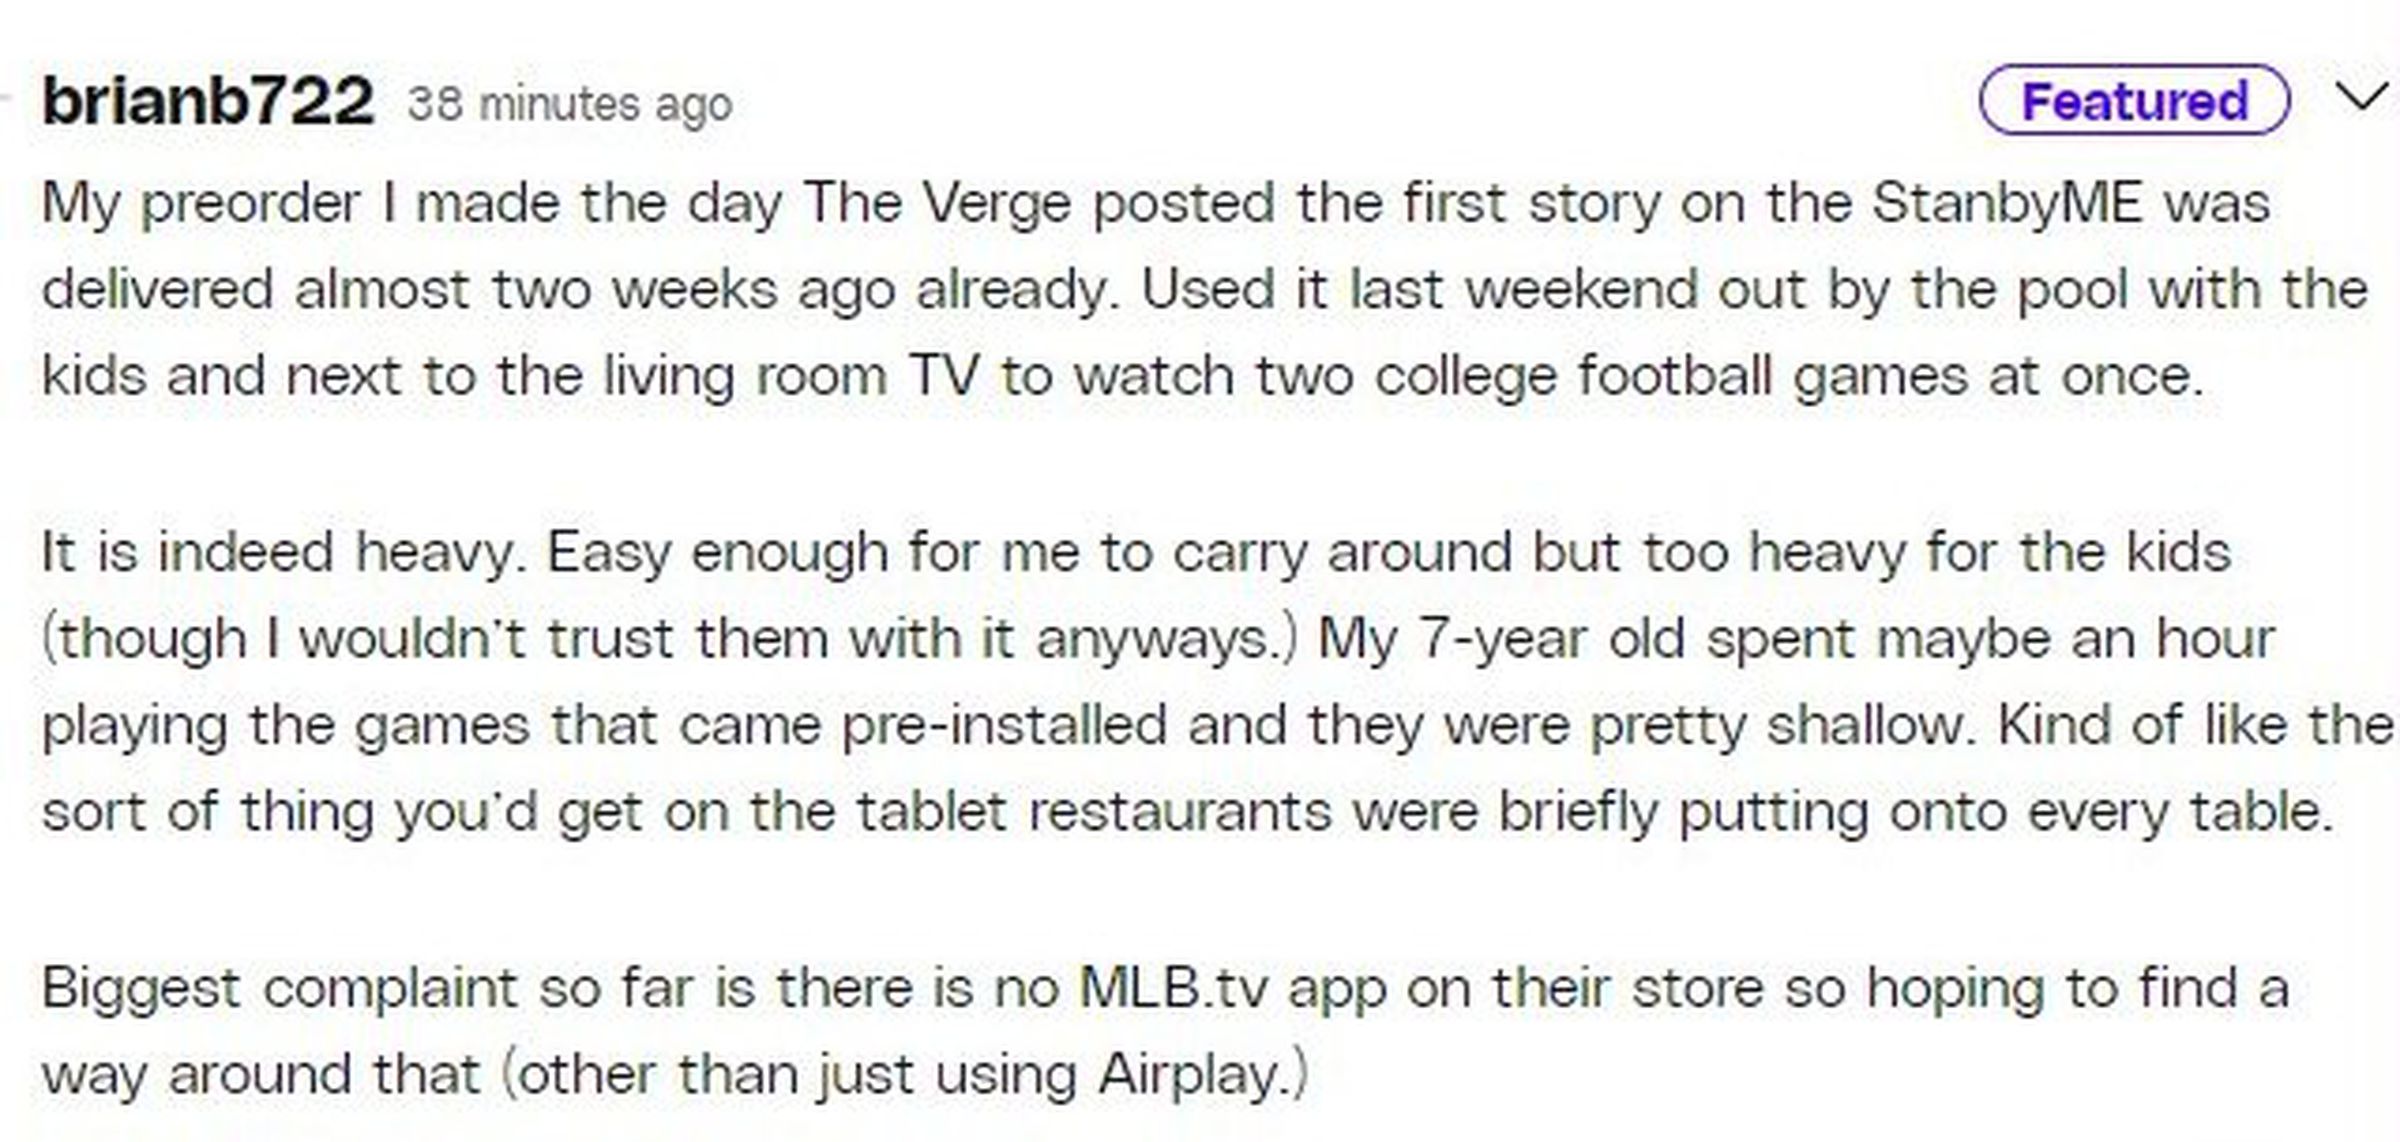 Screenshot of Verge comment by brianb722: My preorder I made the day The Verge posted the first story on the StanbyME was delivered almost two weeks ago. Used it last weekend out by the pool with the kids and next to the living room TV to watch two college football games at once. It is indeed heavy. My 7-year-old spent maybe an hour playing the games that came pre-installed and they were pretty shallow. Kind of like what you’d get on the tablet restaurants were briefly putting onto every table.